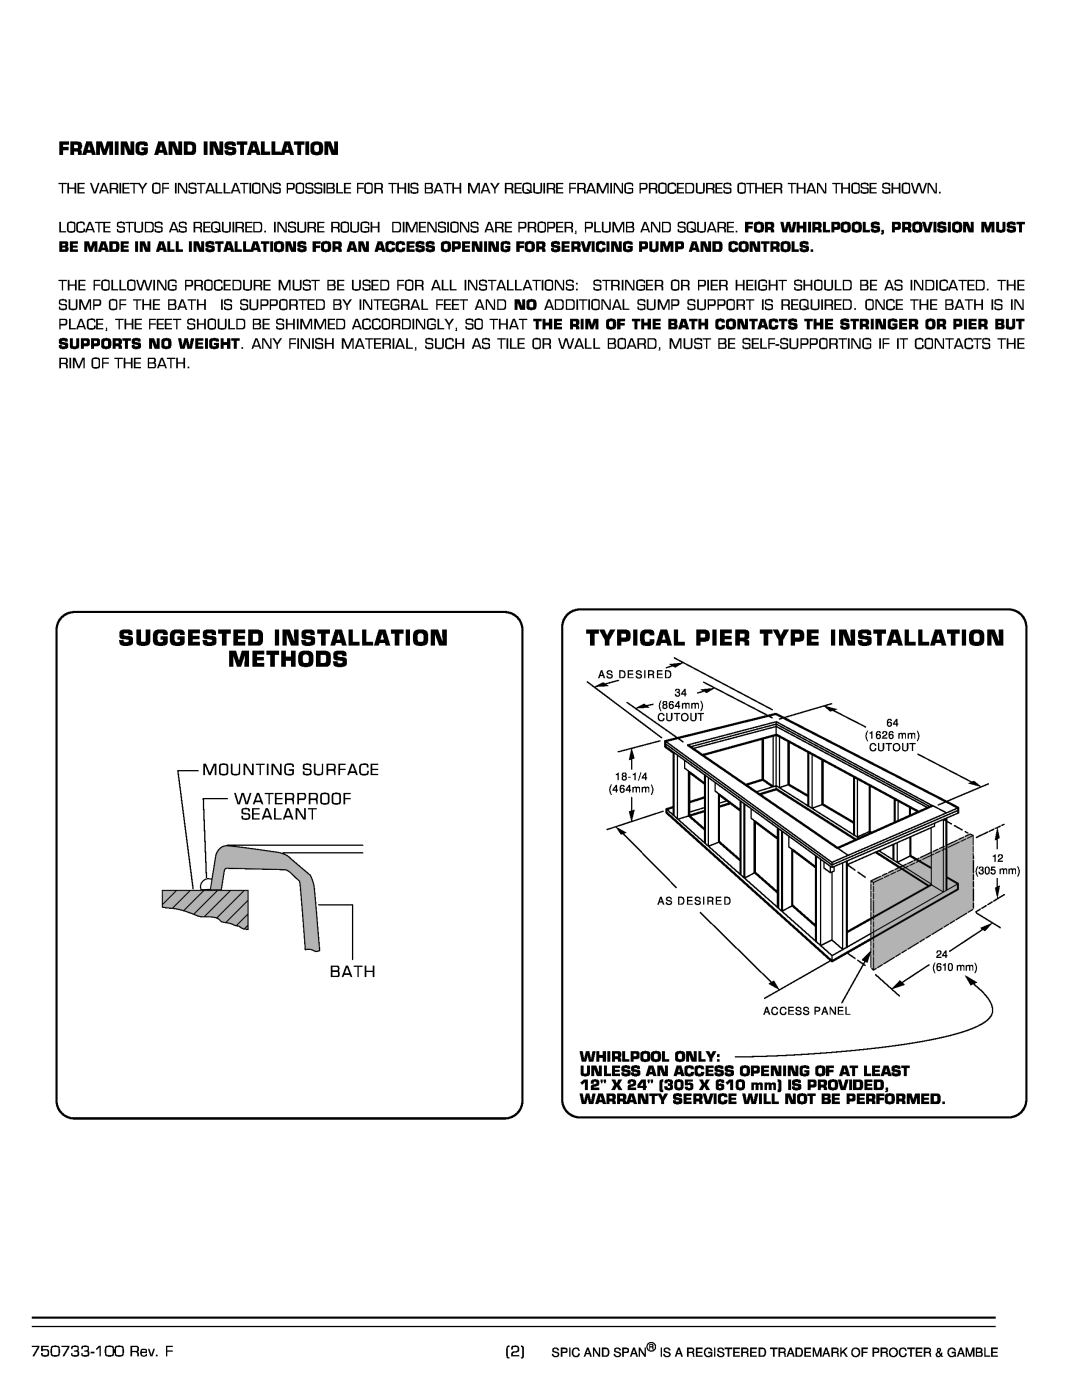 American Standard 2645 Series Suggested Installation Methods, Typical Pier Type Installation, Framing And Installation 